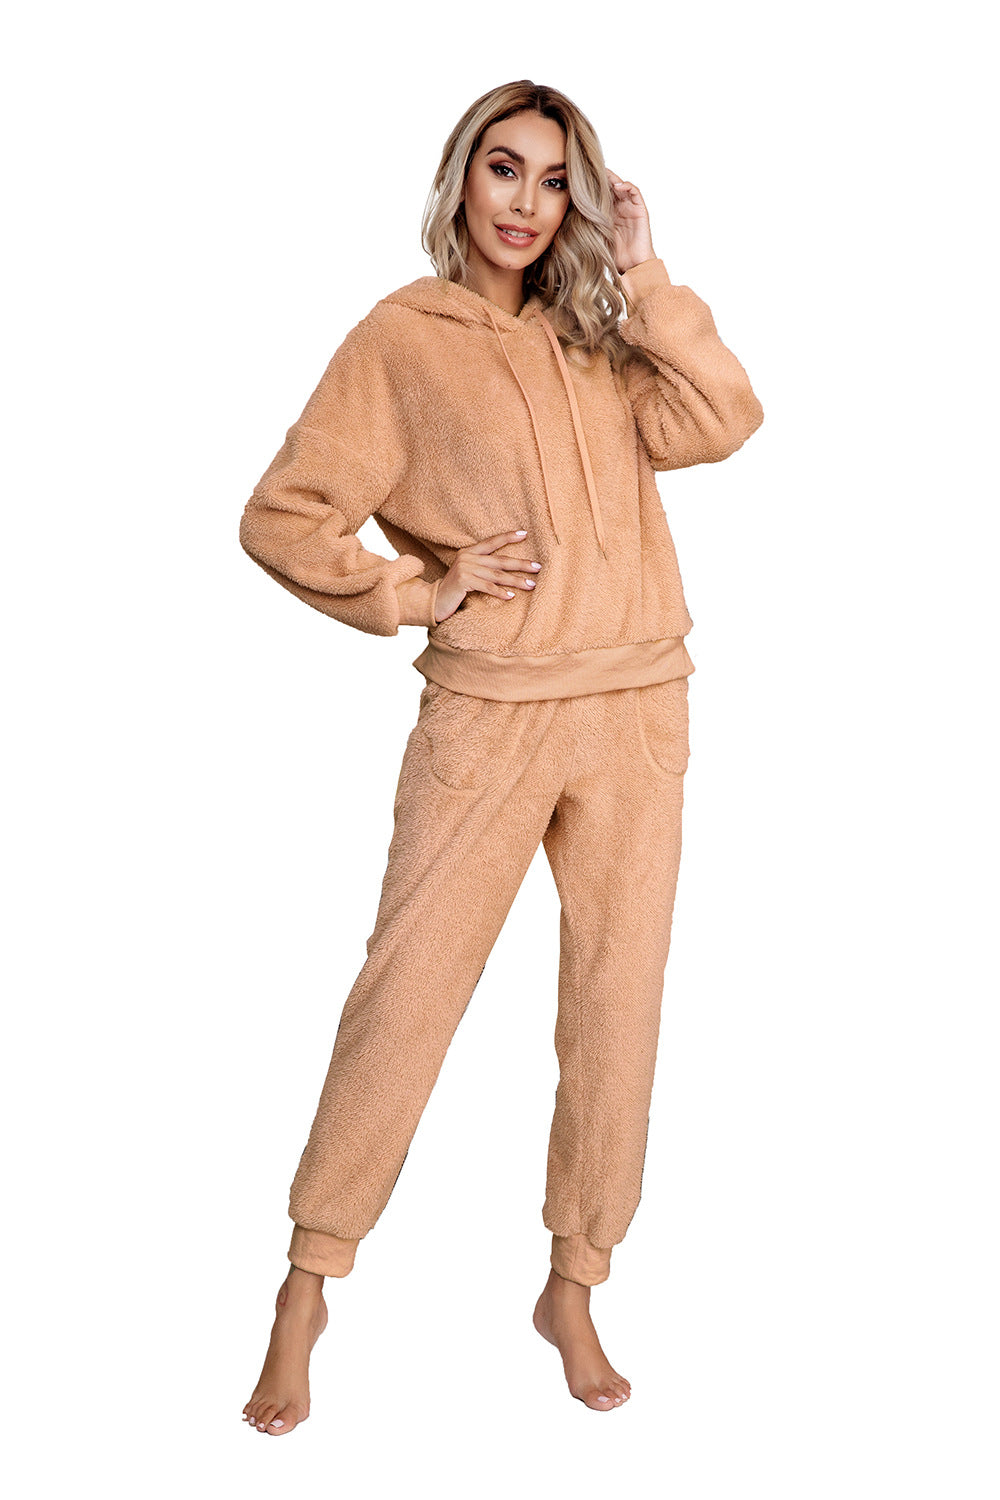 Hooded Woolen Sweaters  and Trousers Home Wear Co Ord Sets